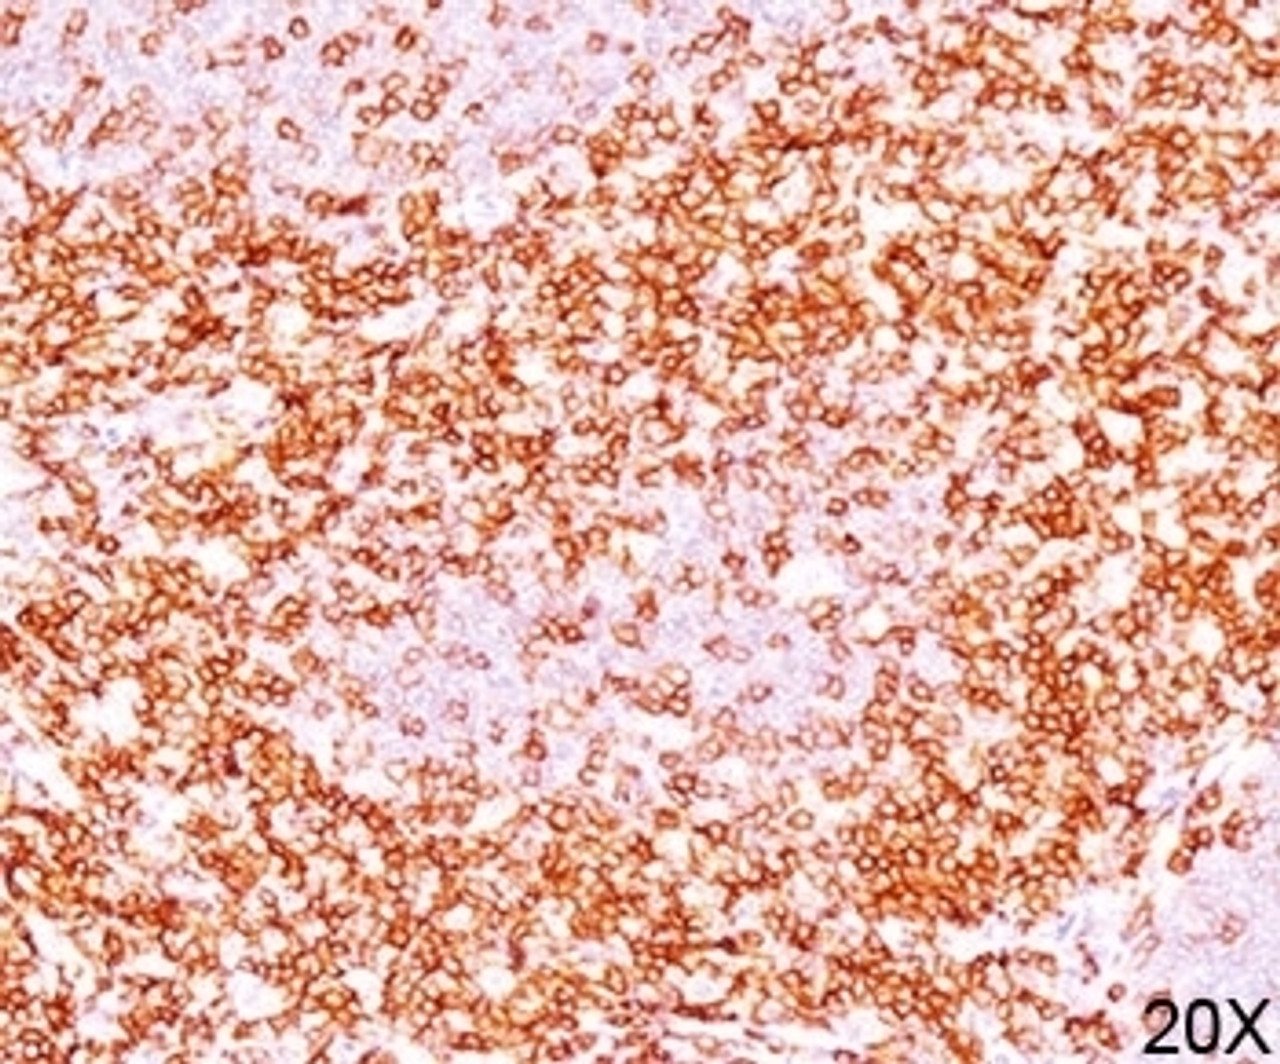 IHC testing of human tonsil (10X) stained with CD6 antibody (C6/372) .